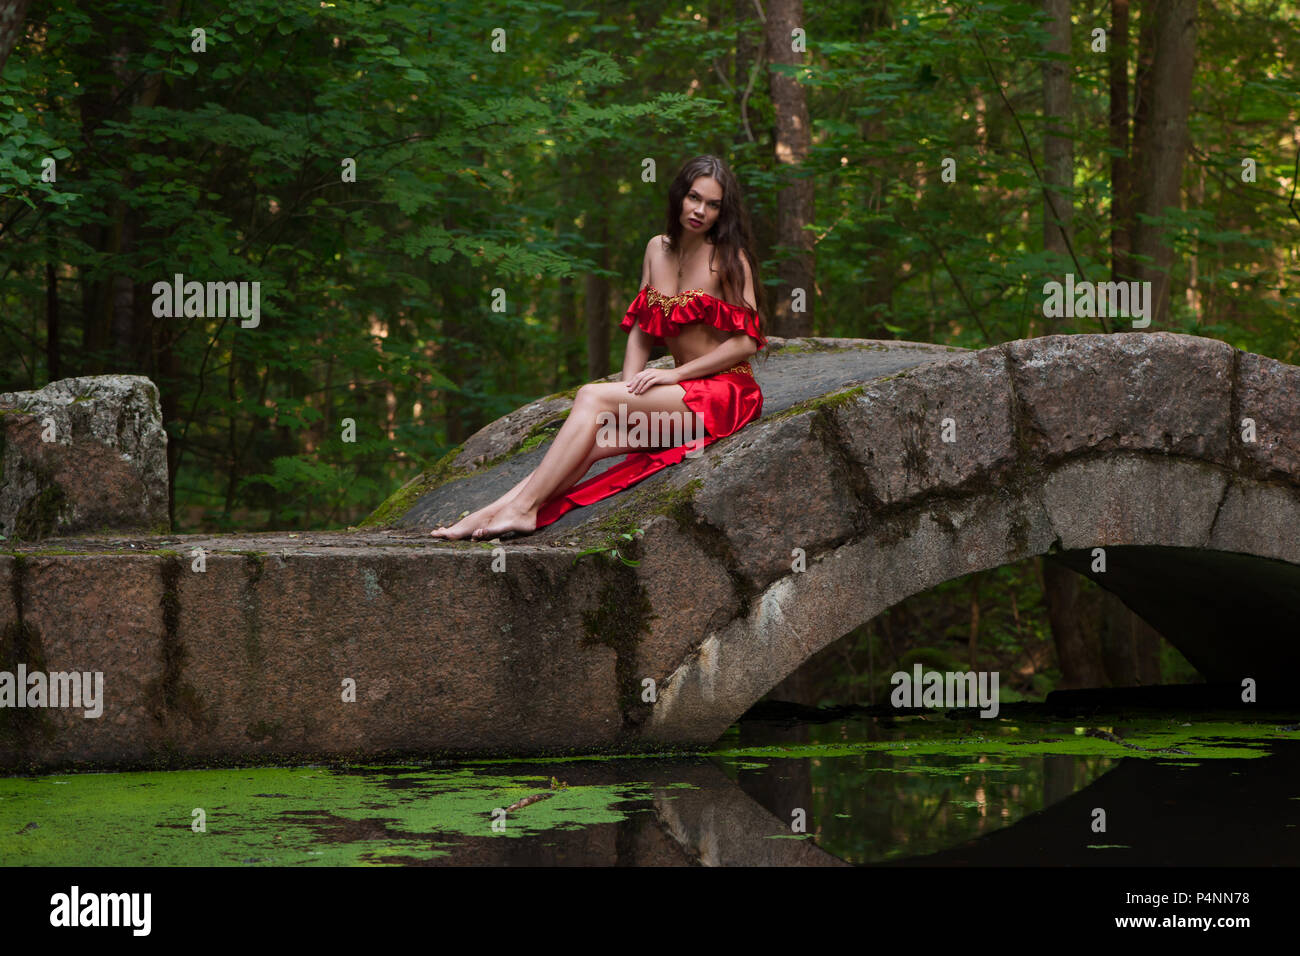 Woman in red dress on bridge in forest Stock Photo